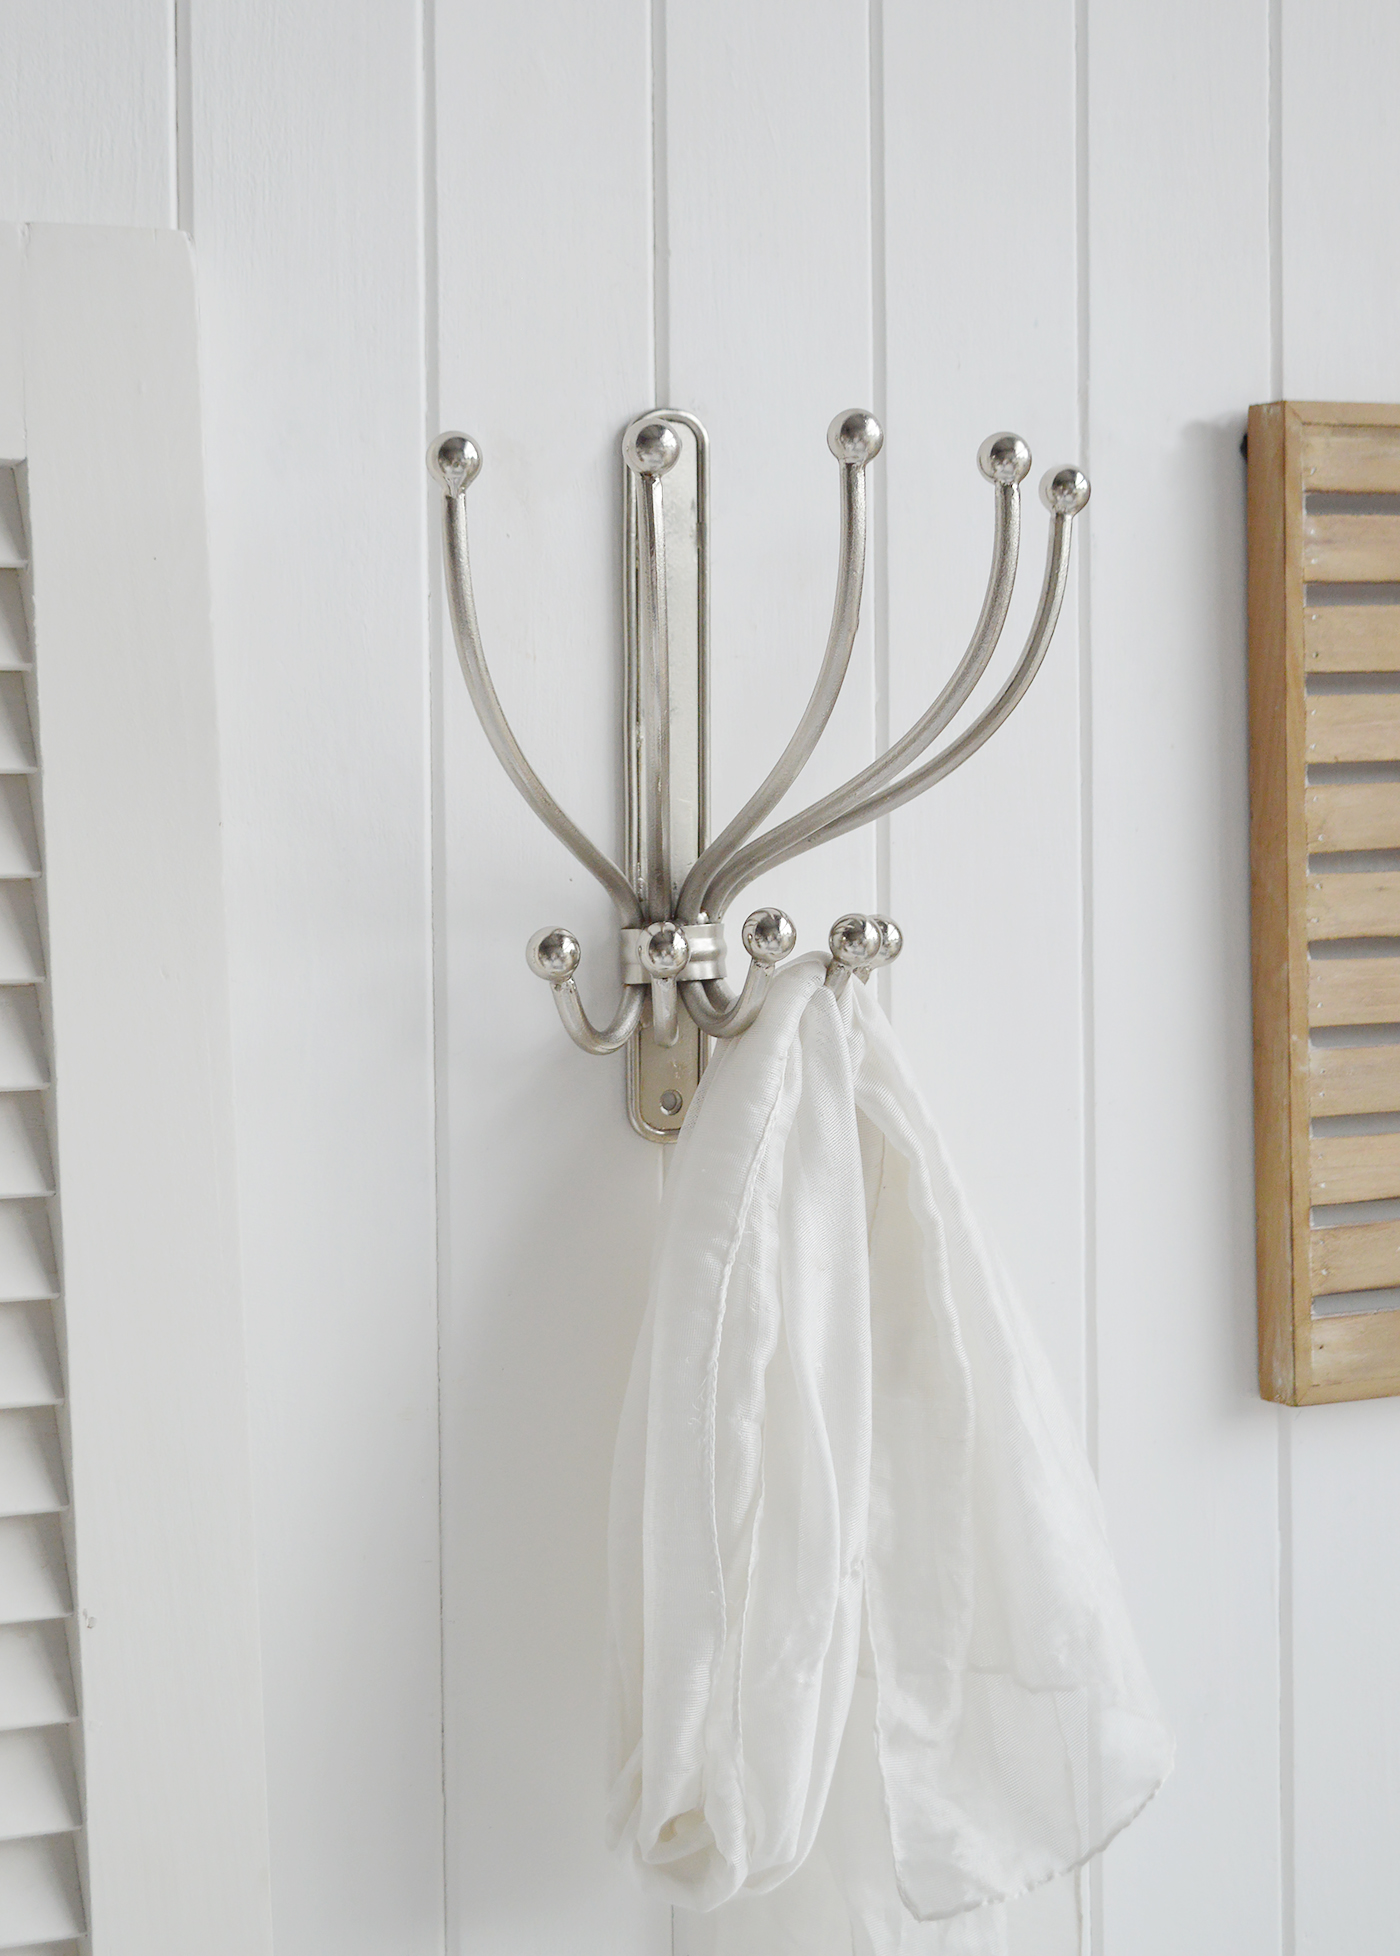 Silver Coat Rack - New England Hallway Furniture for coastal, country and modern farmhouse styled homes and interiors